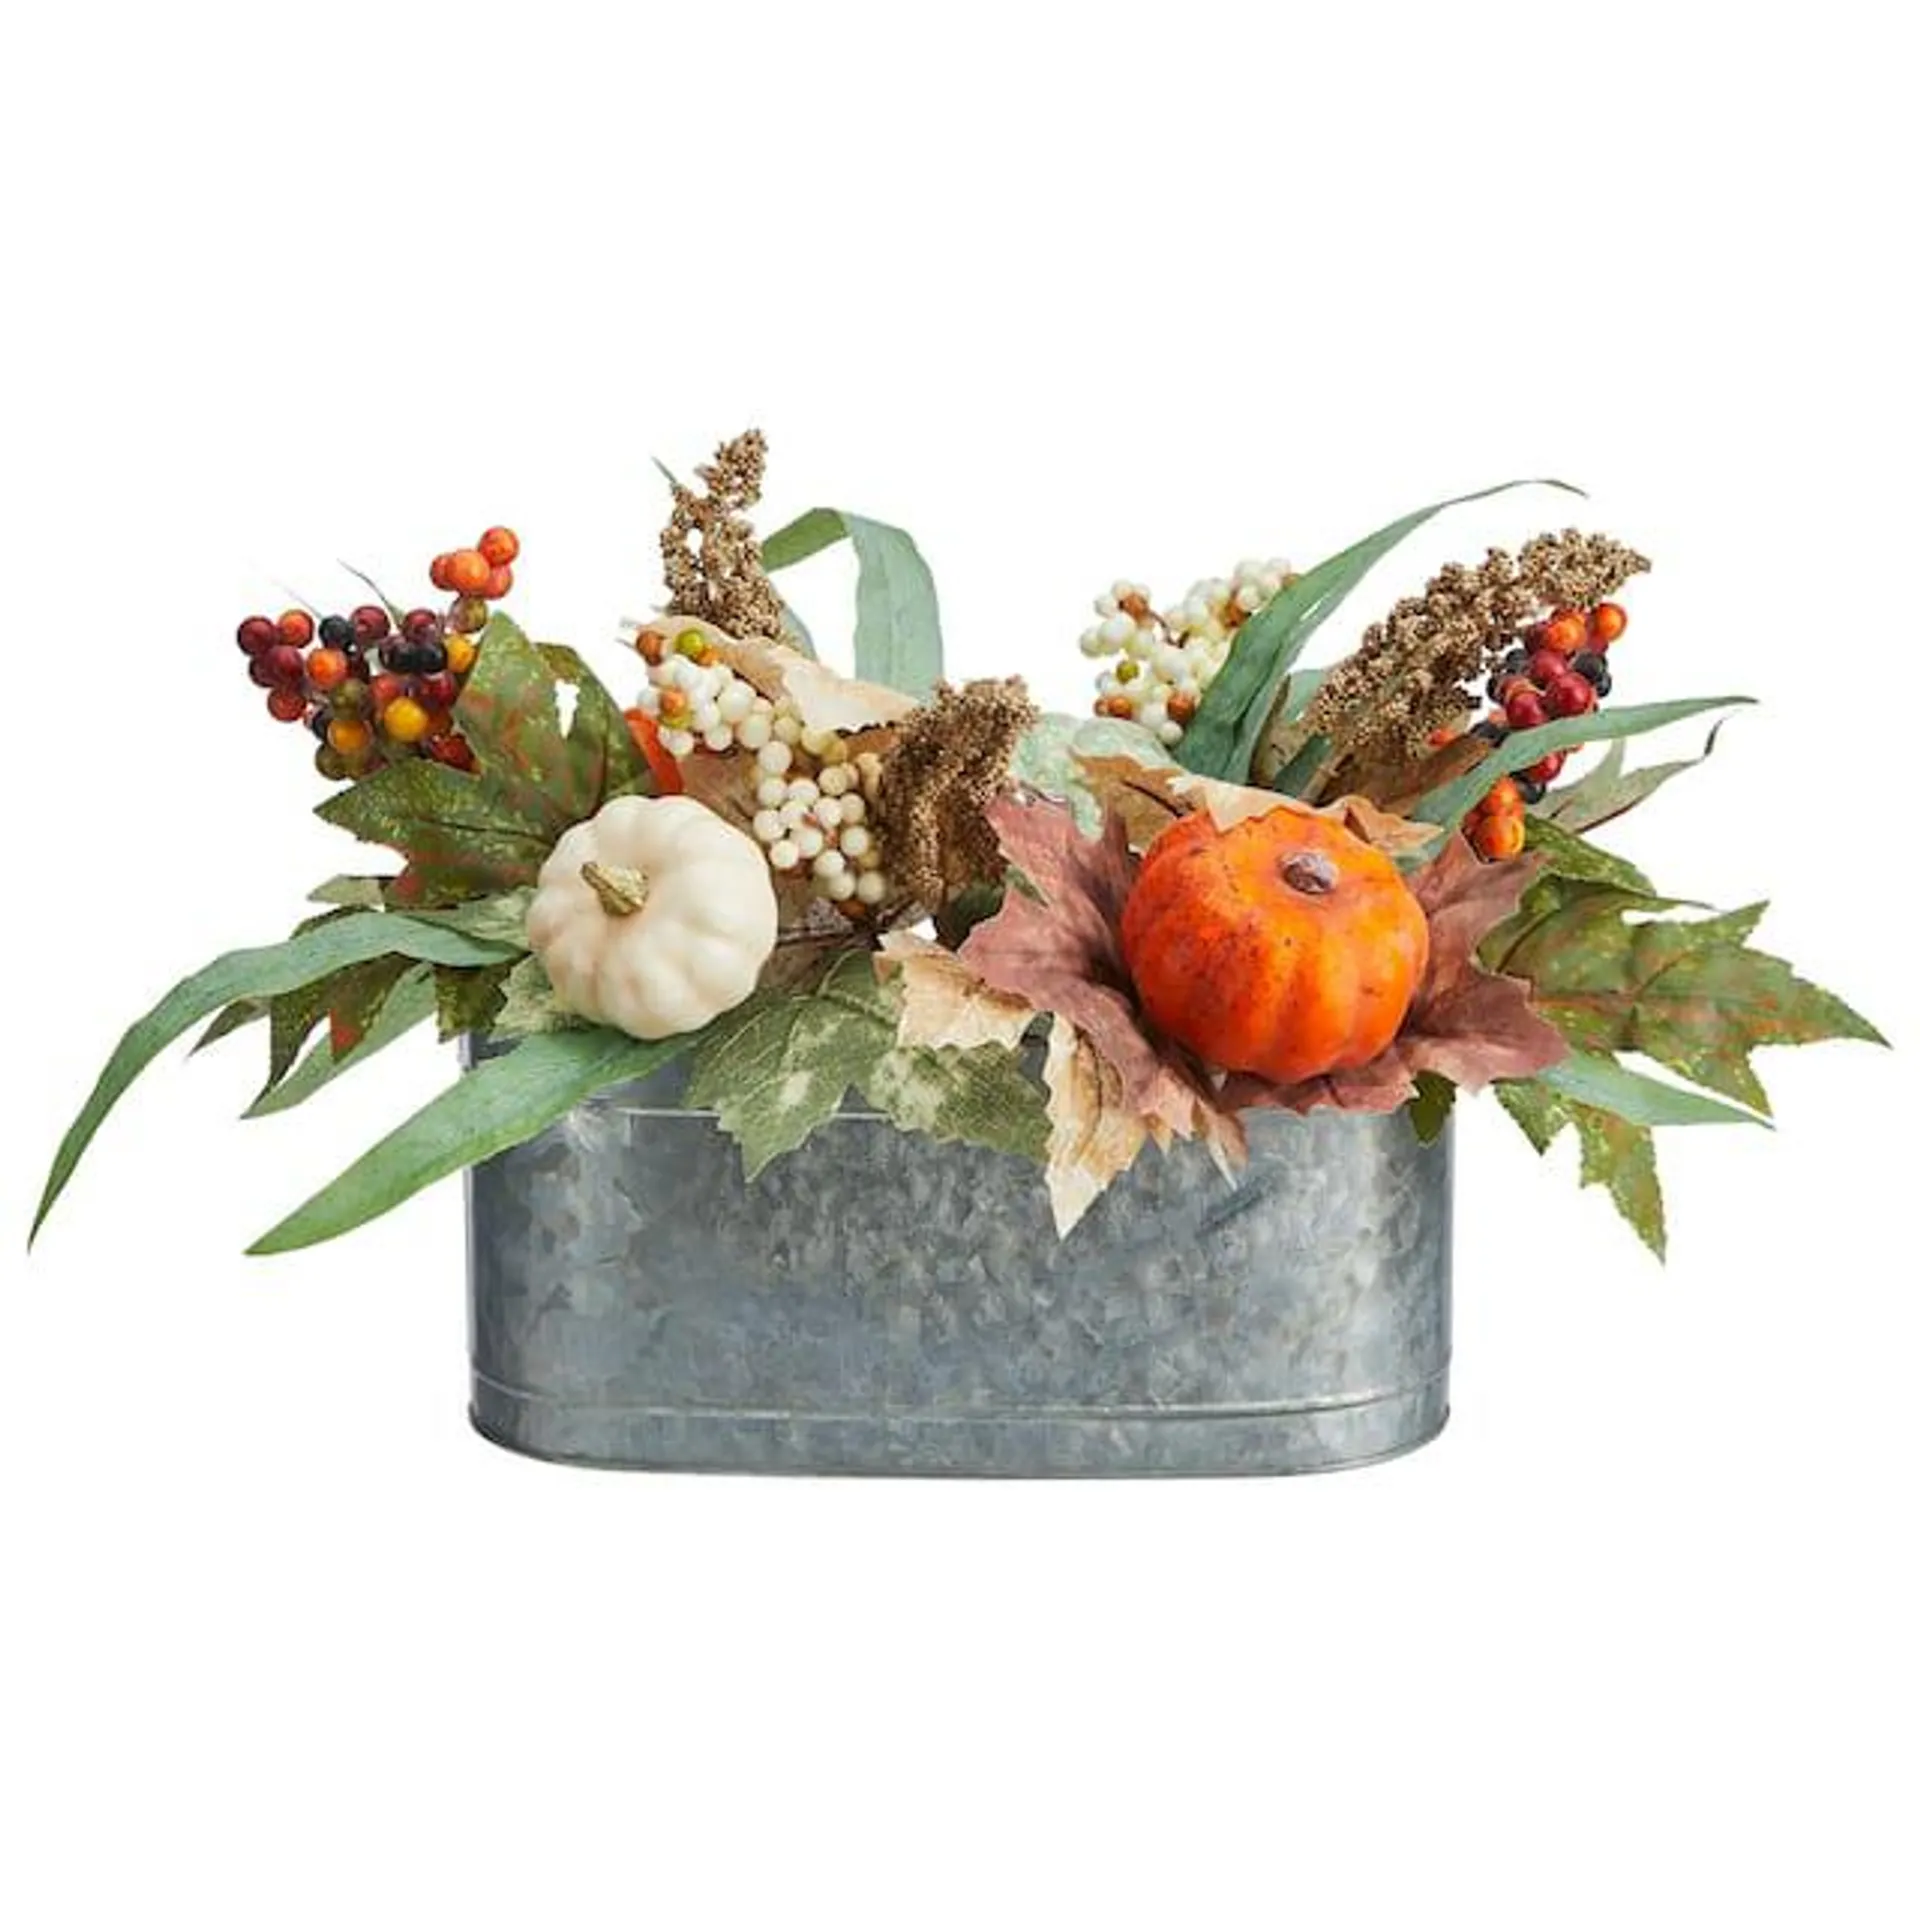 CANVAS Galvanized Harvest Basket with Florals & Pumpkins, Multi-Coloured, 10-in, Indoor Decoration for Fall